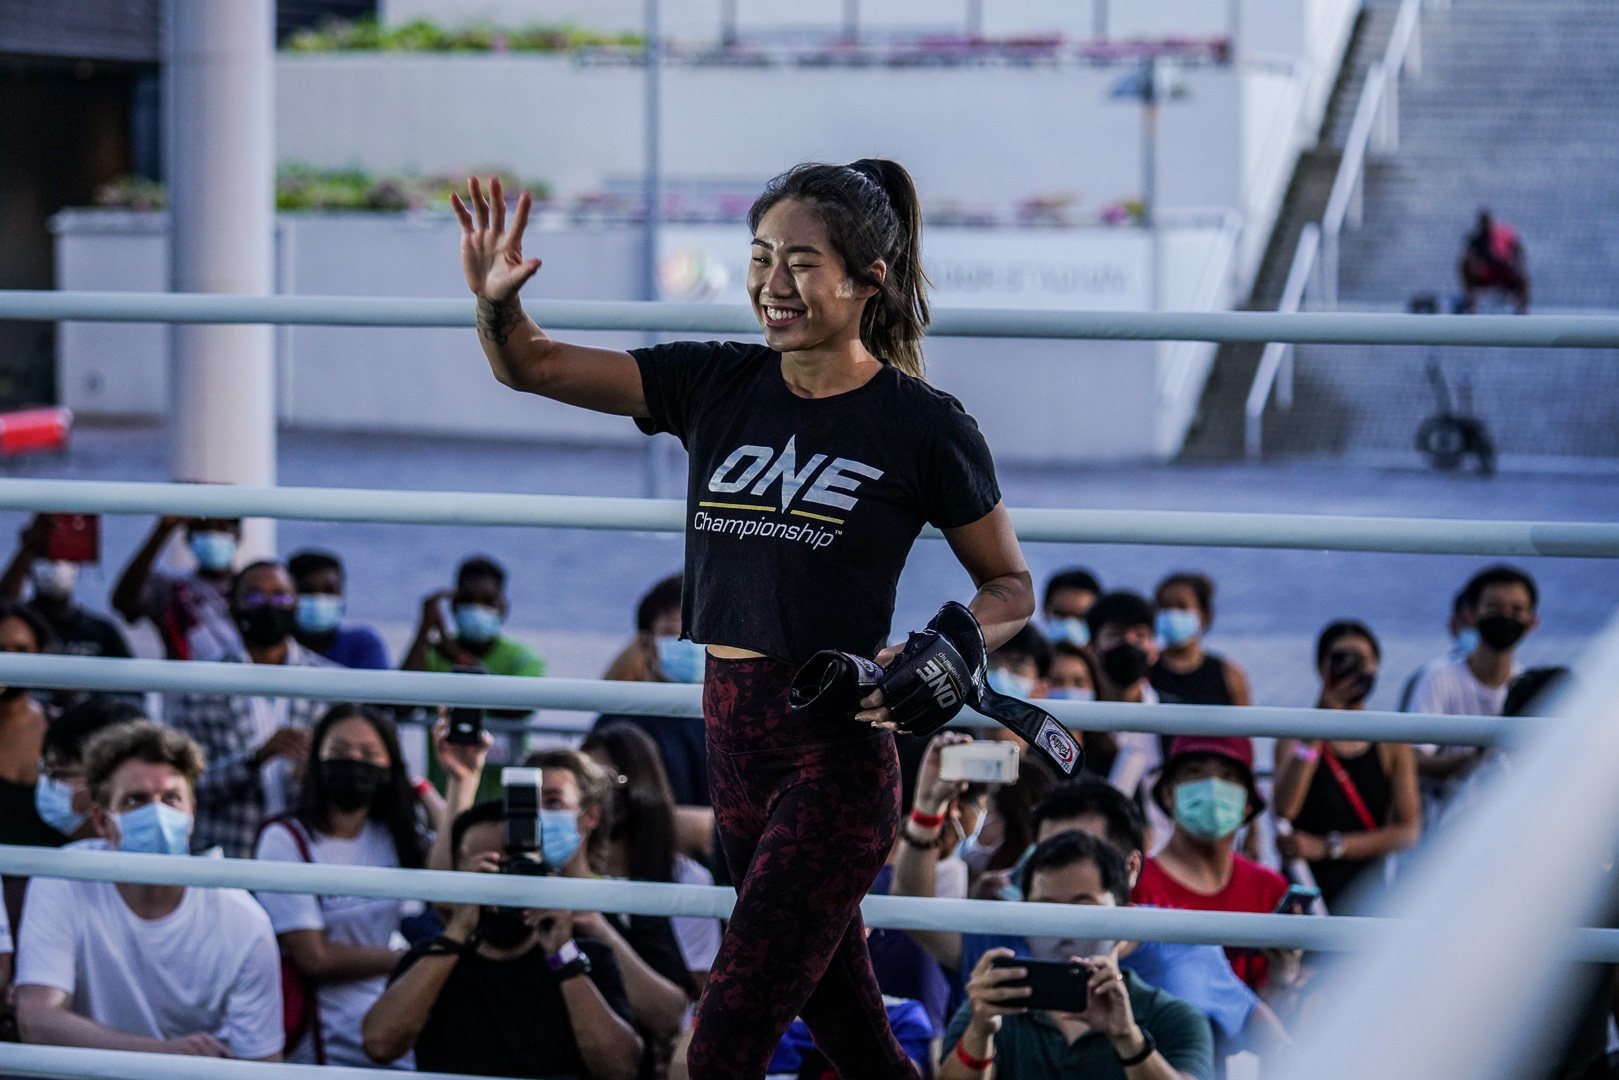 ONE atomweight champion Angela Lee addresses fans and media at the ONE X open workouts in Singapore. Photo: ONE Championship